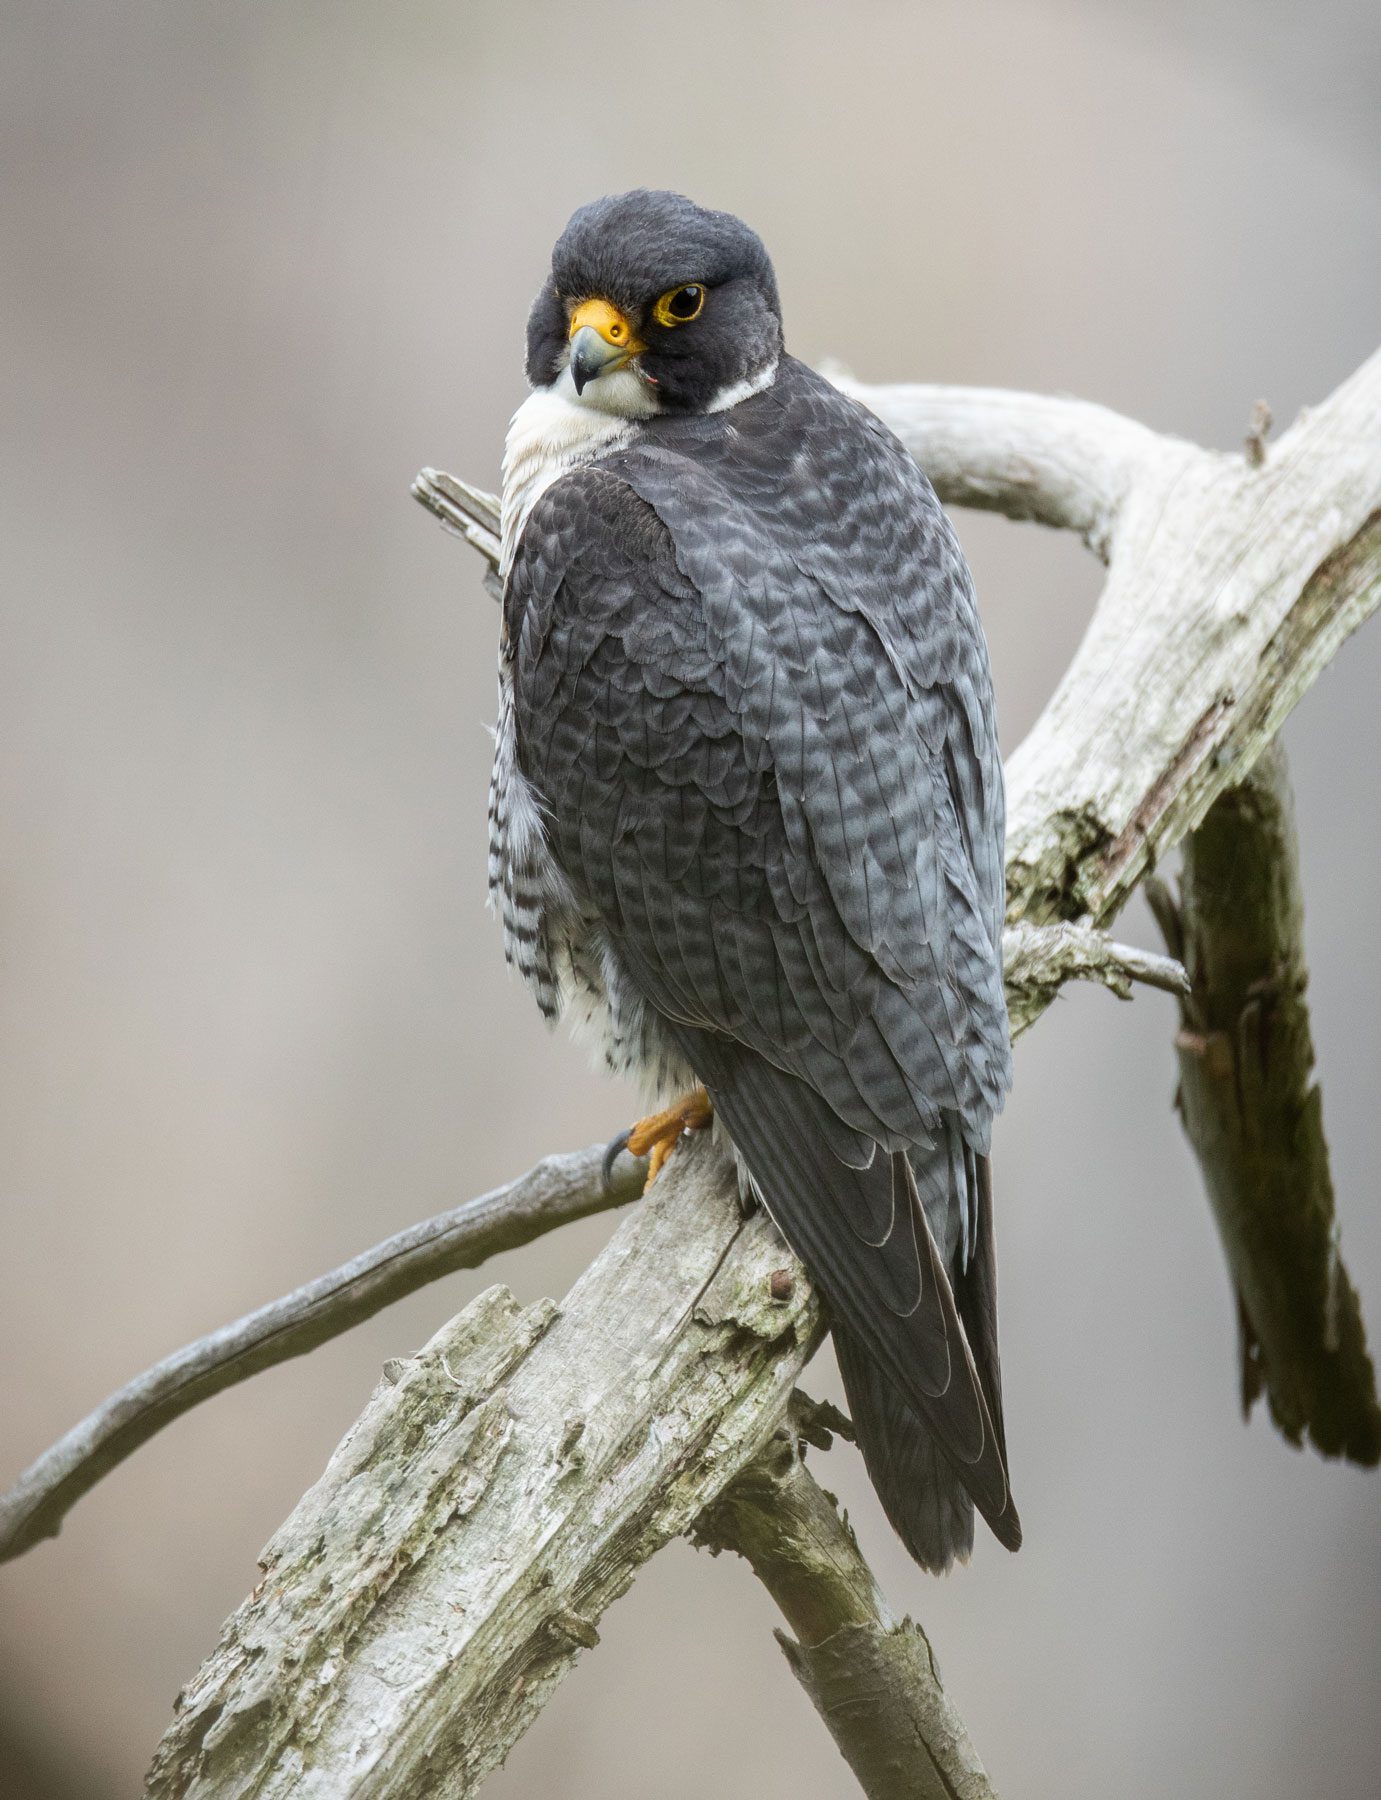 An adult Peregrine Falcon in the Taughannock Gorge. Photo by Andy Johnson.